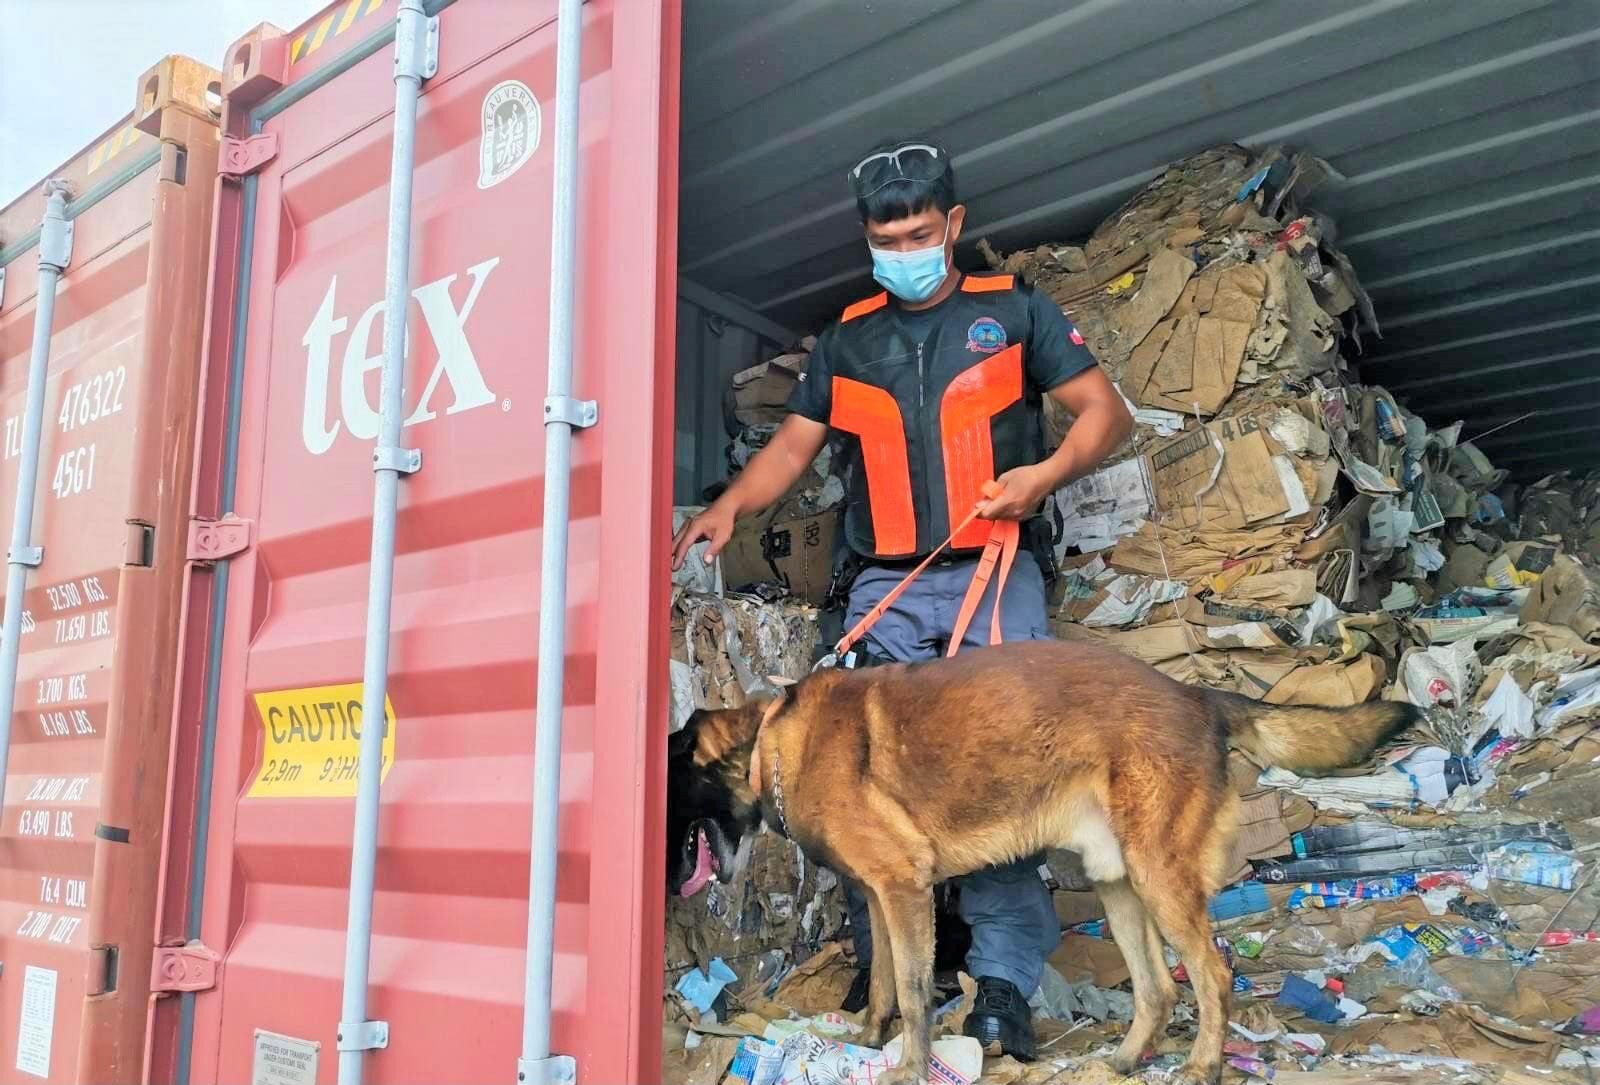 Customs intercepts containers of waste materials from US at Subic port